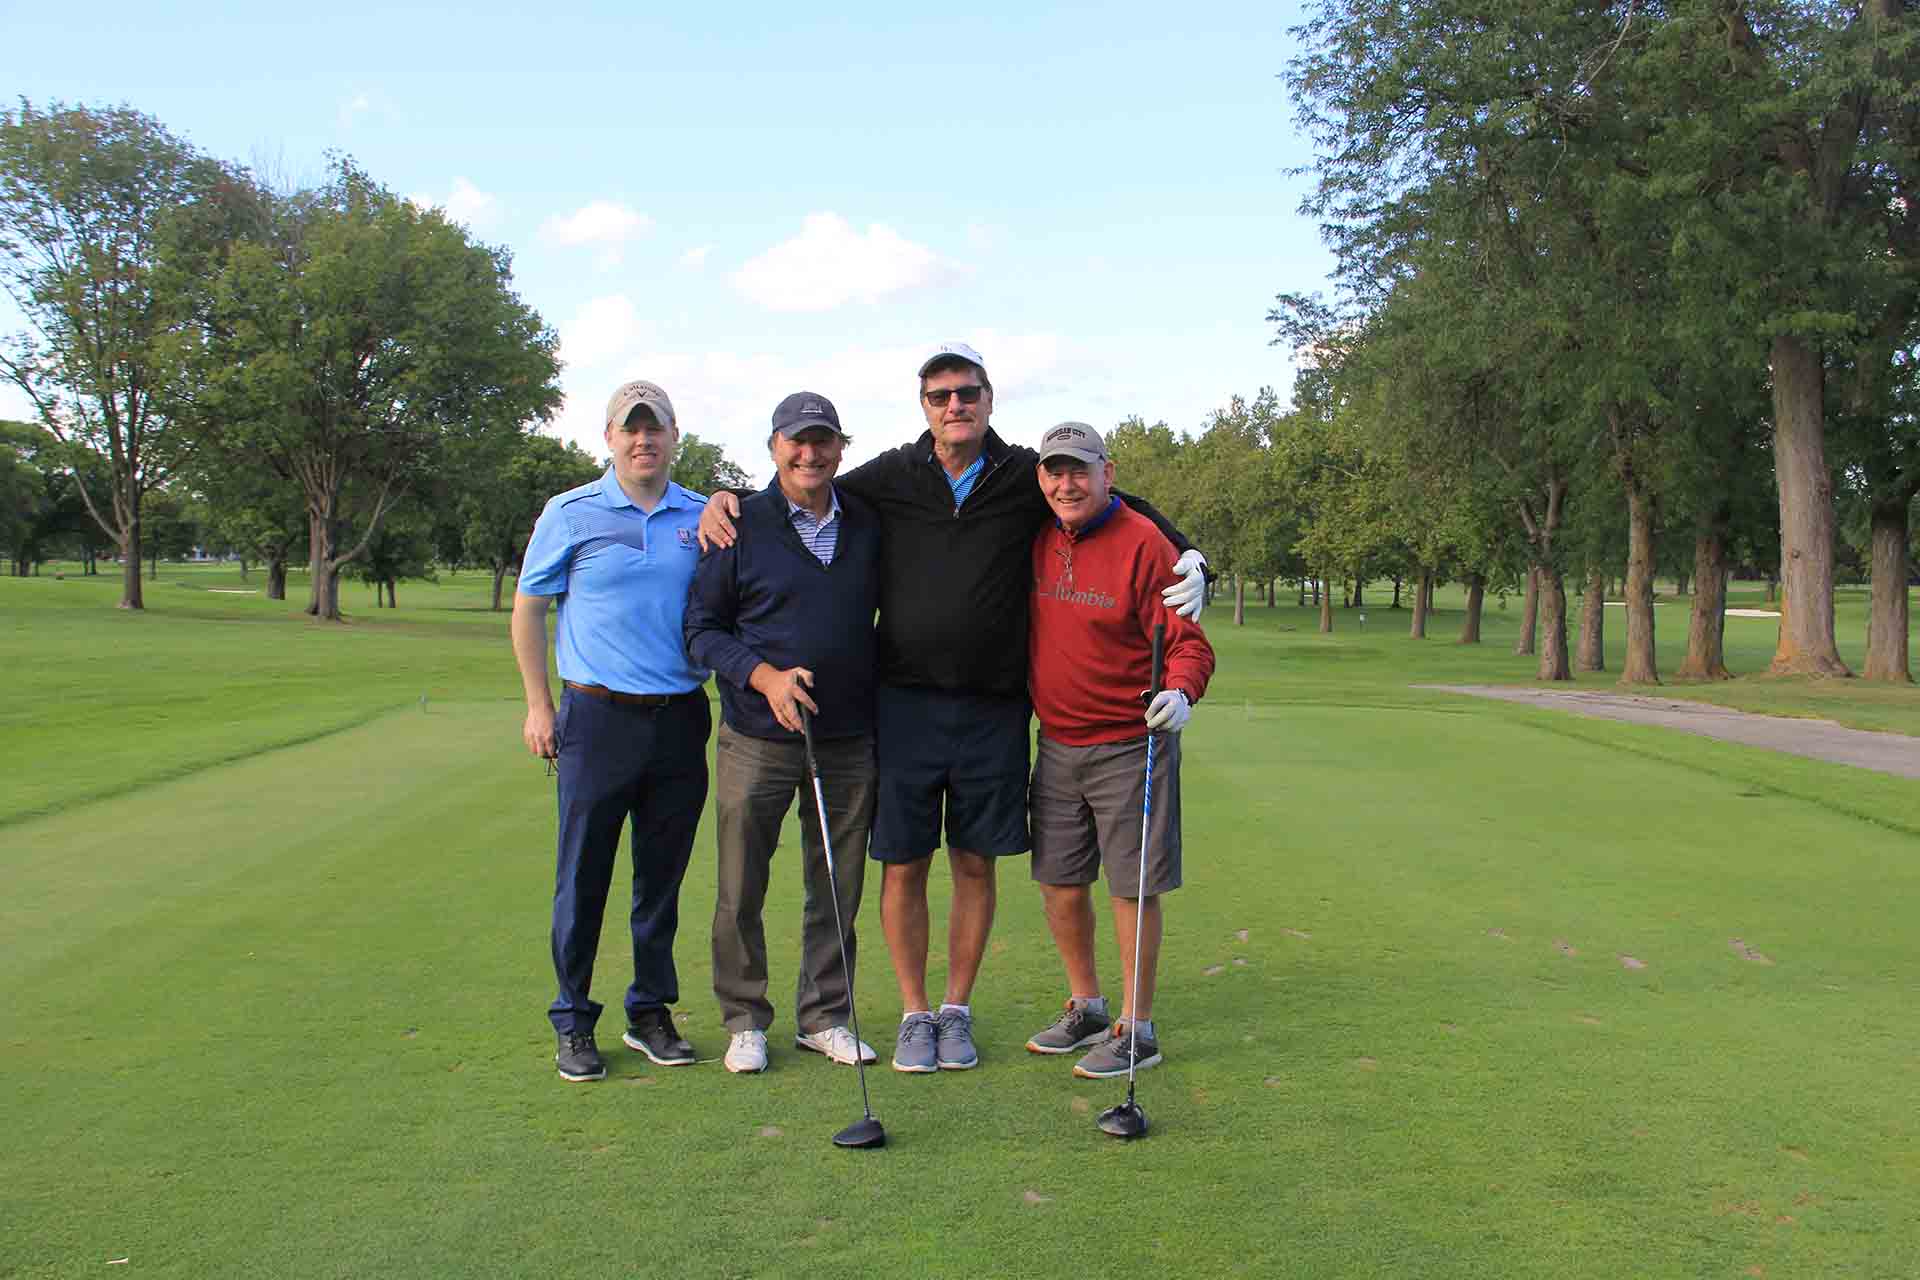 2022-Endowment-Golf-Classic-four-golfers-pose-for-picture